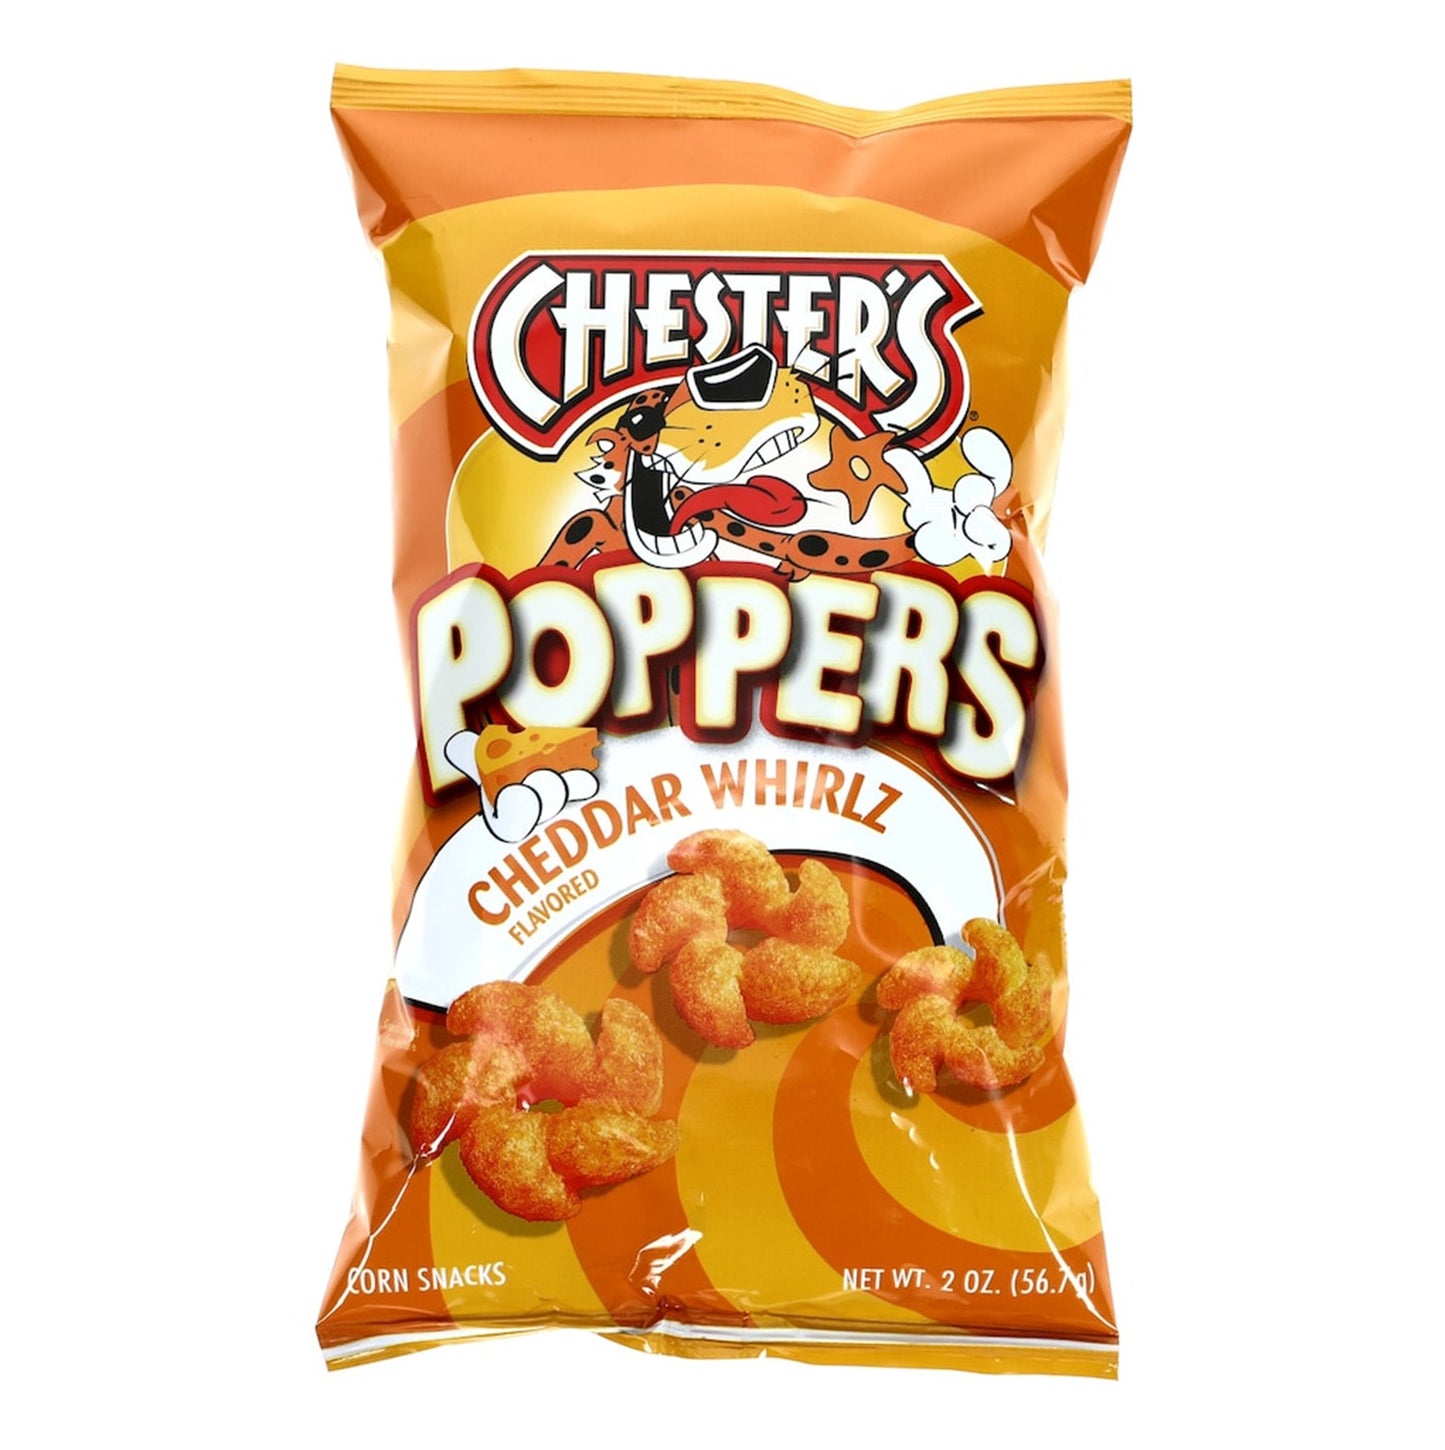 Chester's Poppers Cheddar Whirls Chips, 2-oz. Bags